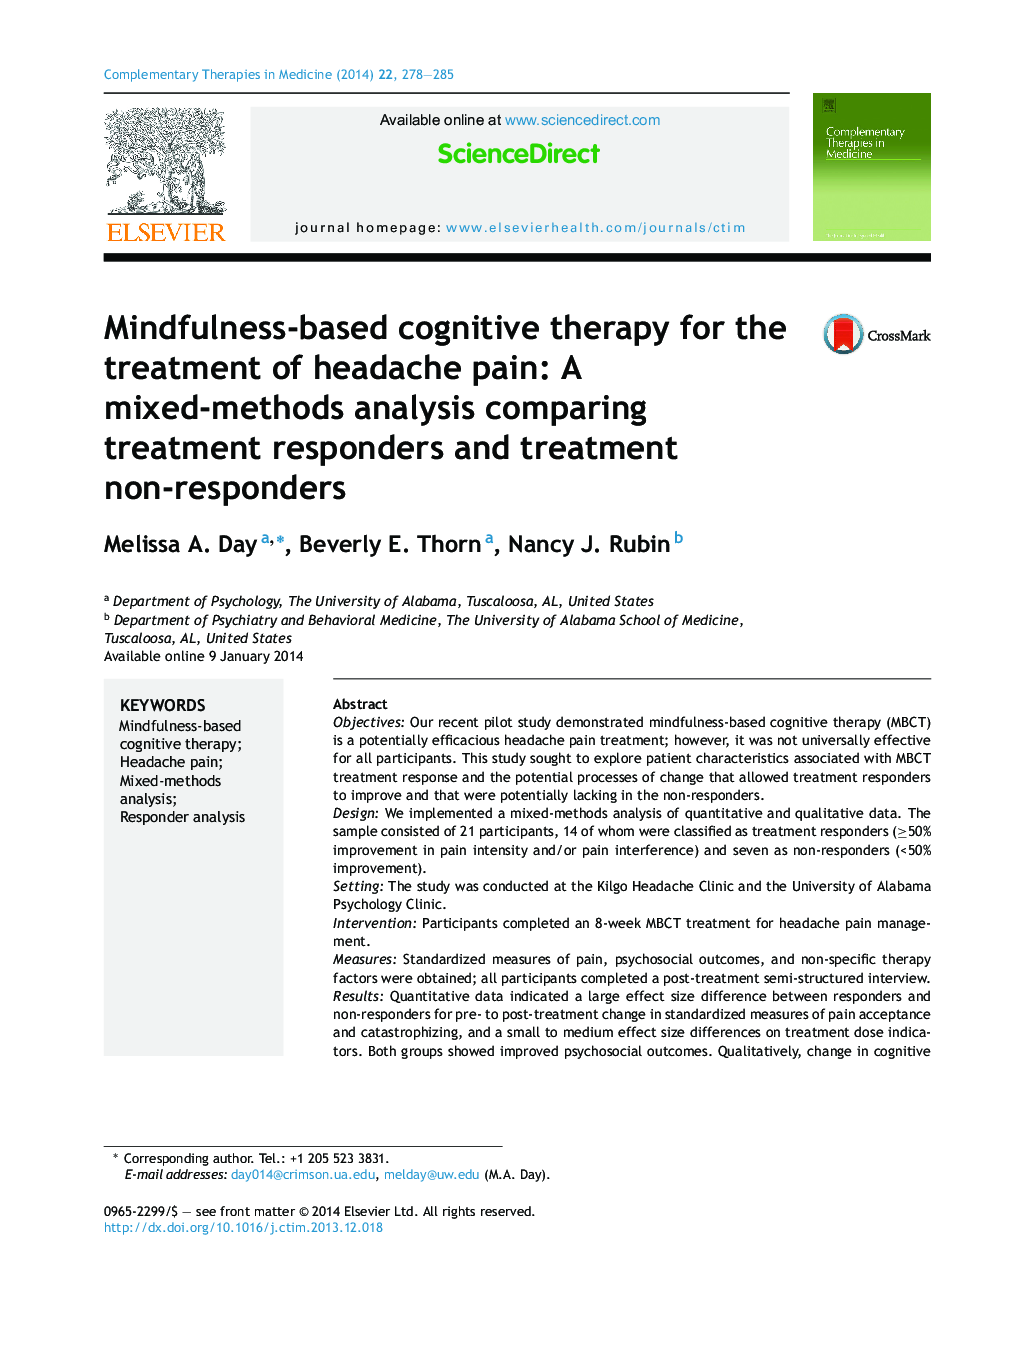 Mindfulness-based cognitive therapy for the treatment of headache pain: A mixed-methods analysis comparing treatment responders and treatment non-responders